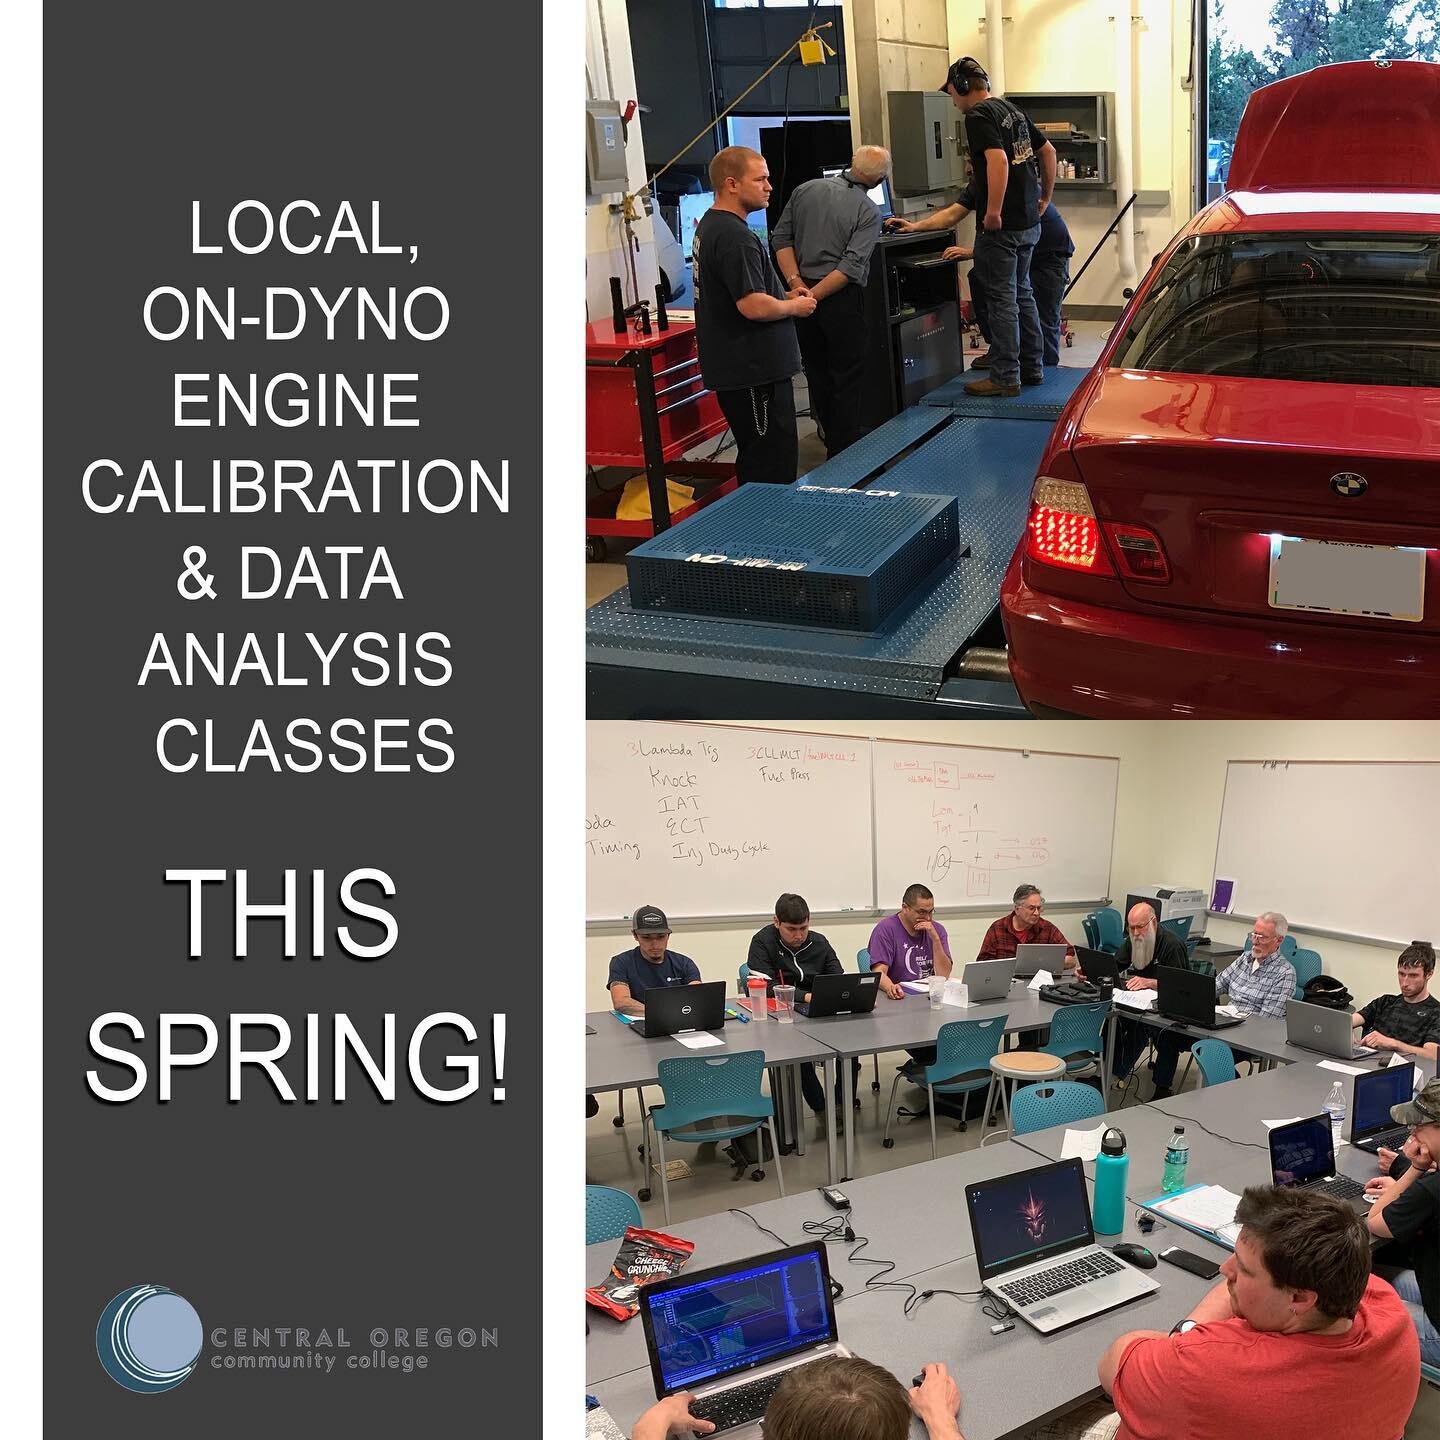 Class coming this spring!  We are only doing a small class so we have as much one on one time as possible. To register call COCC at 541.383.7270. This is a really fun class, dynamic class with lecture, on dyno, and remote track support for real cars 